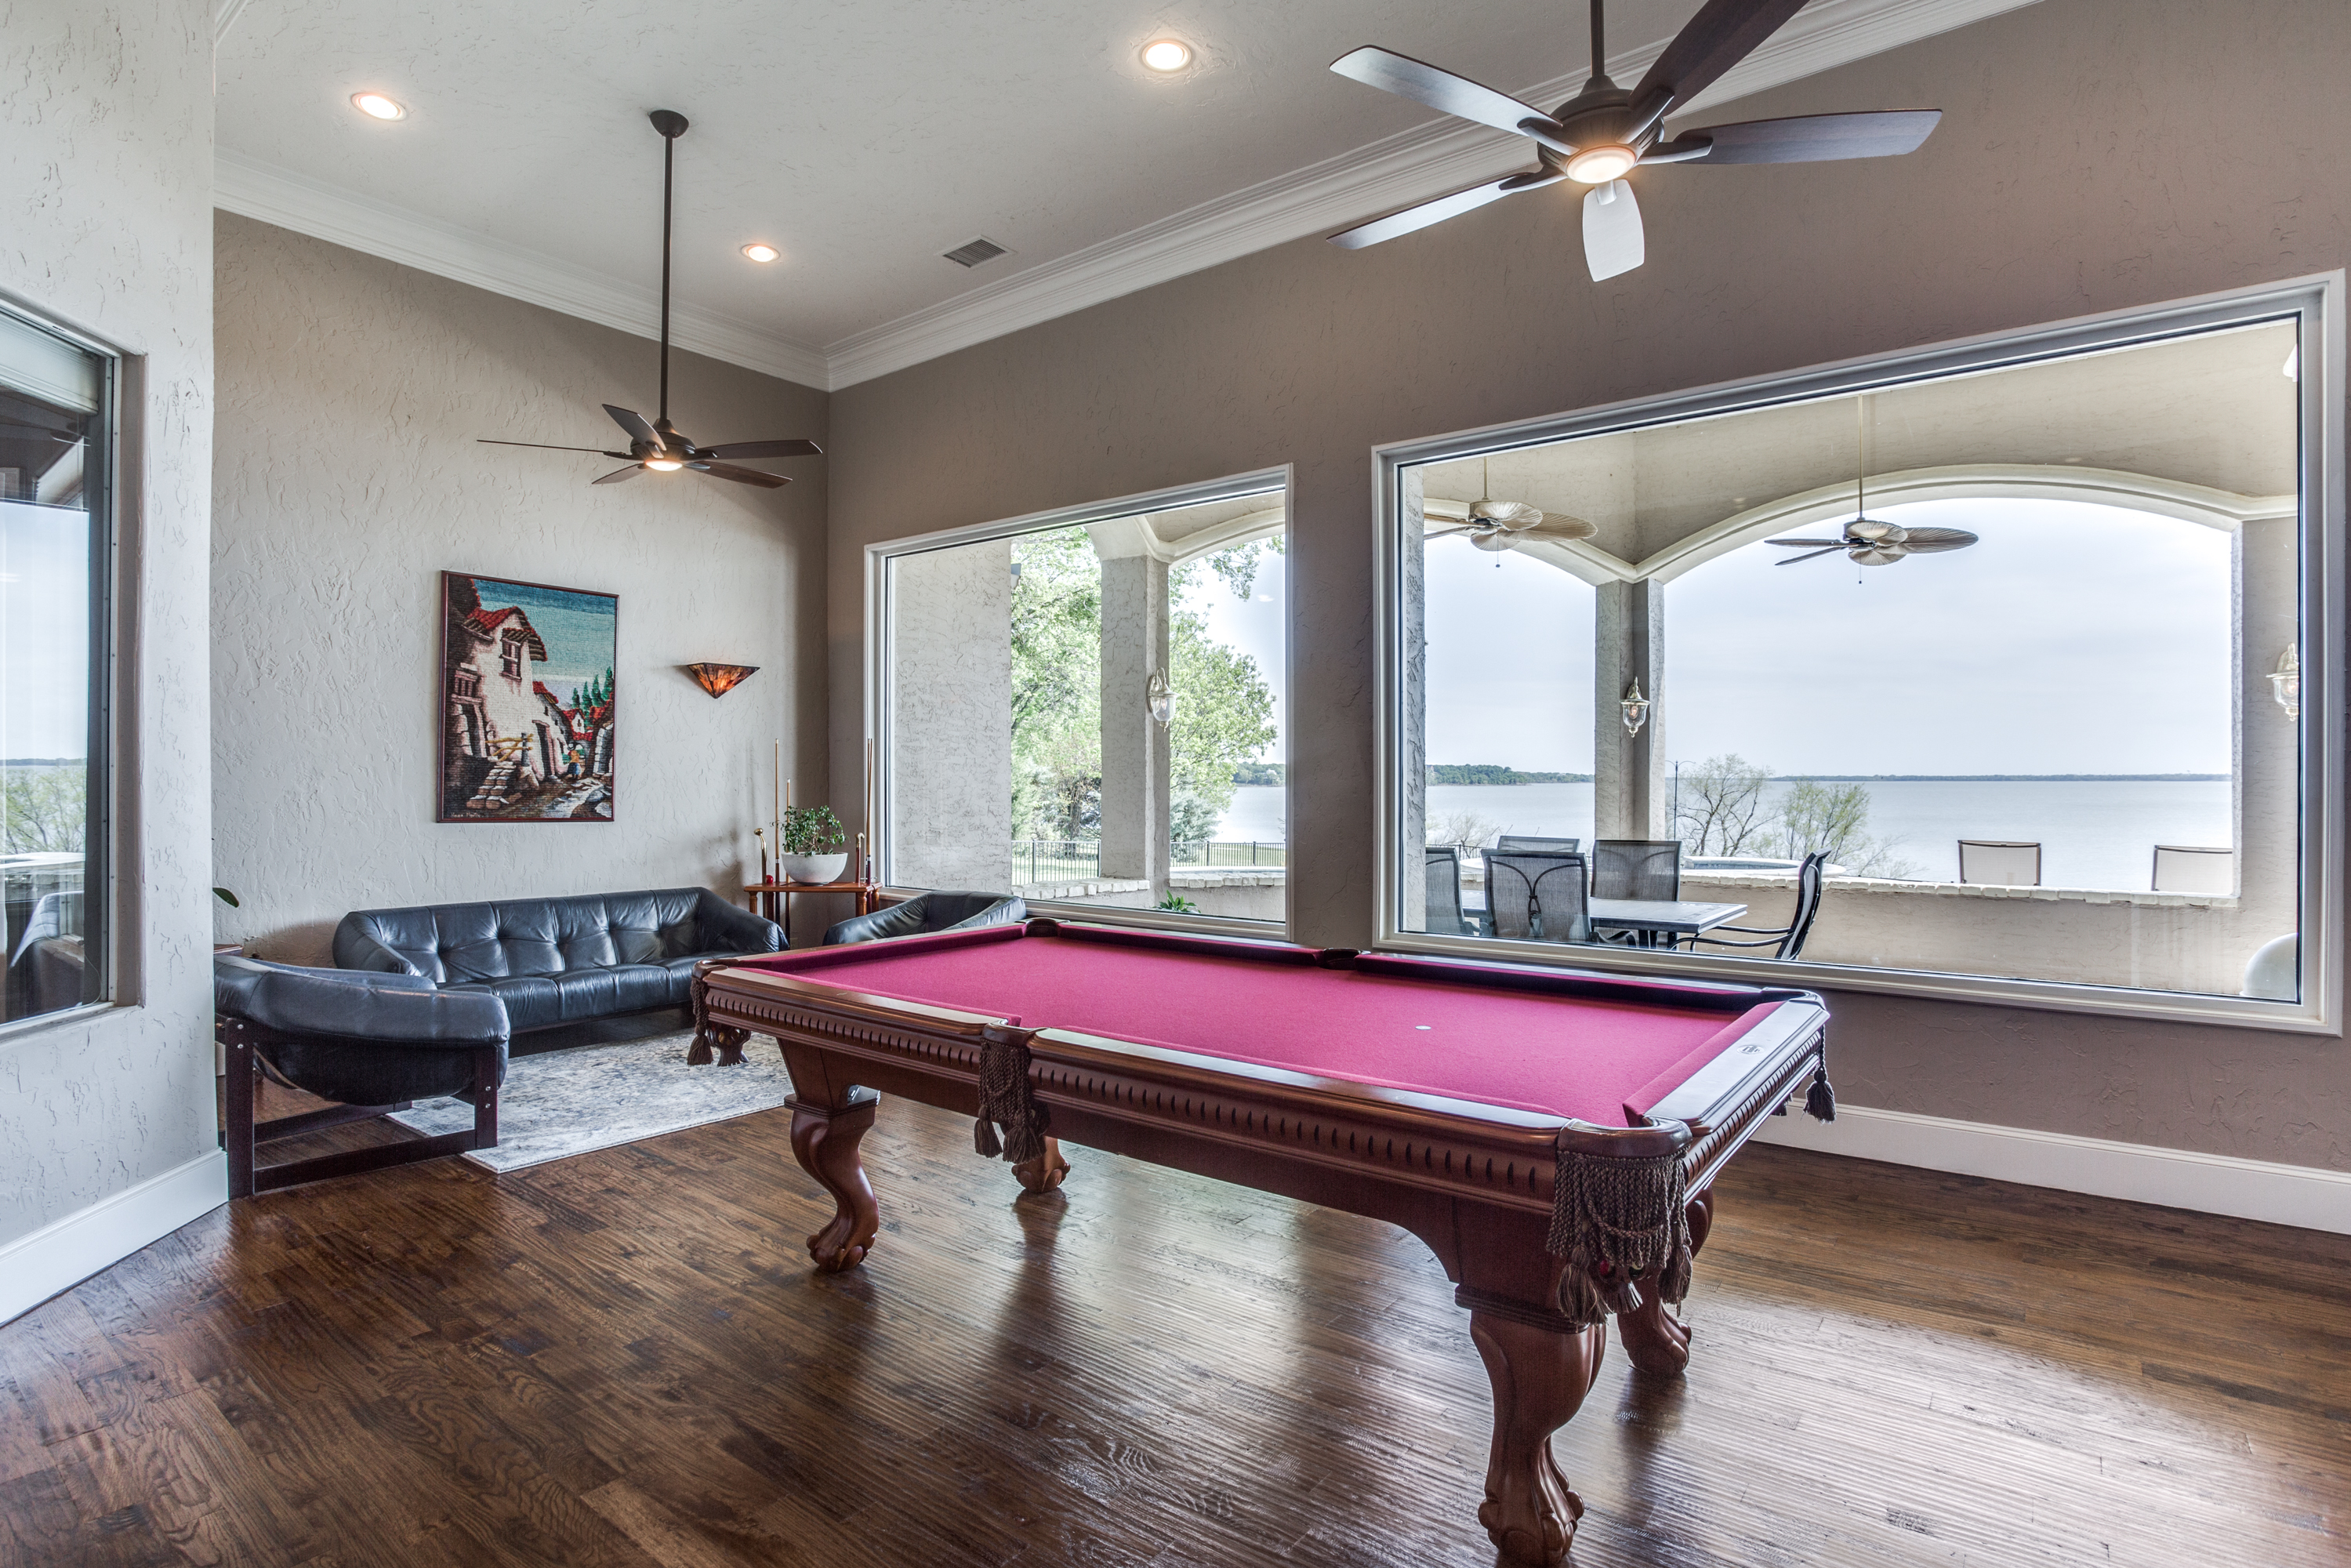 Pool room with amazing views. Hand scraped wood floors recently installed throughout most of the 1st floor.